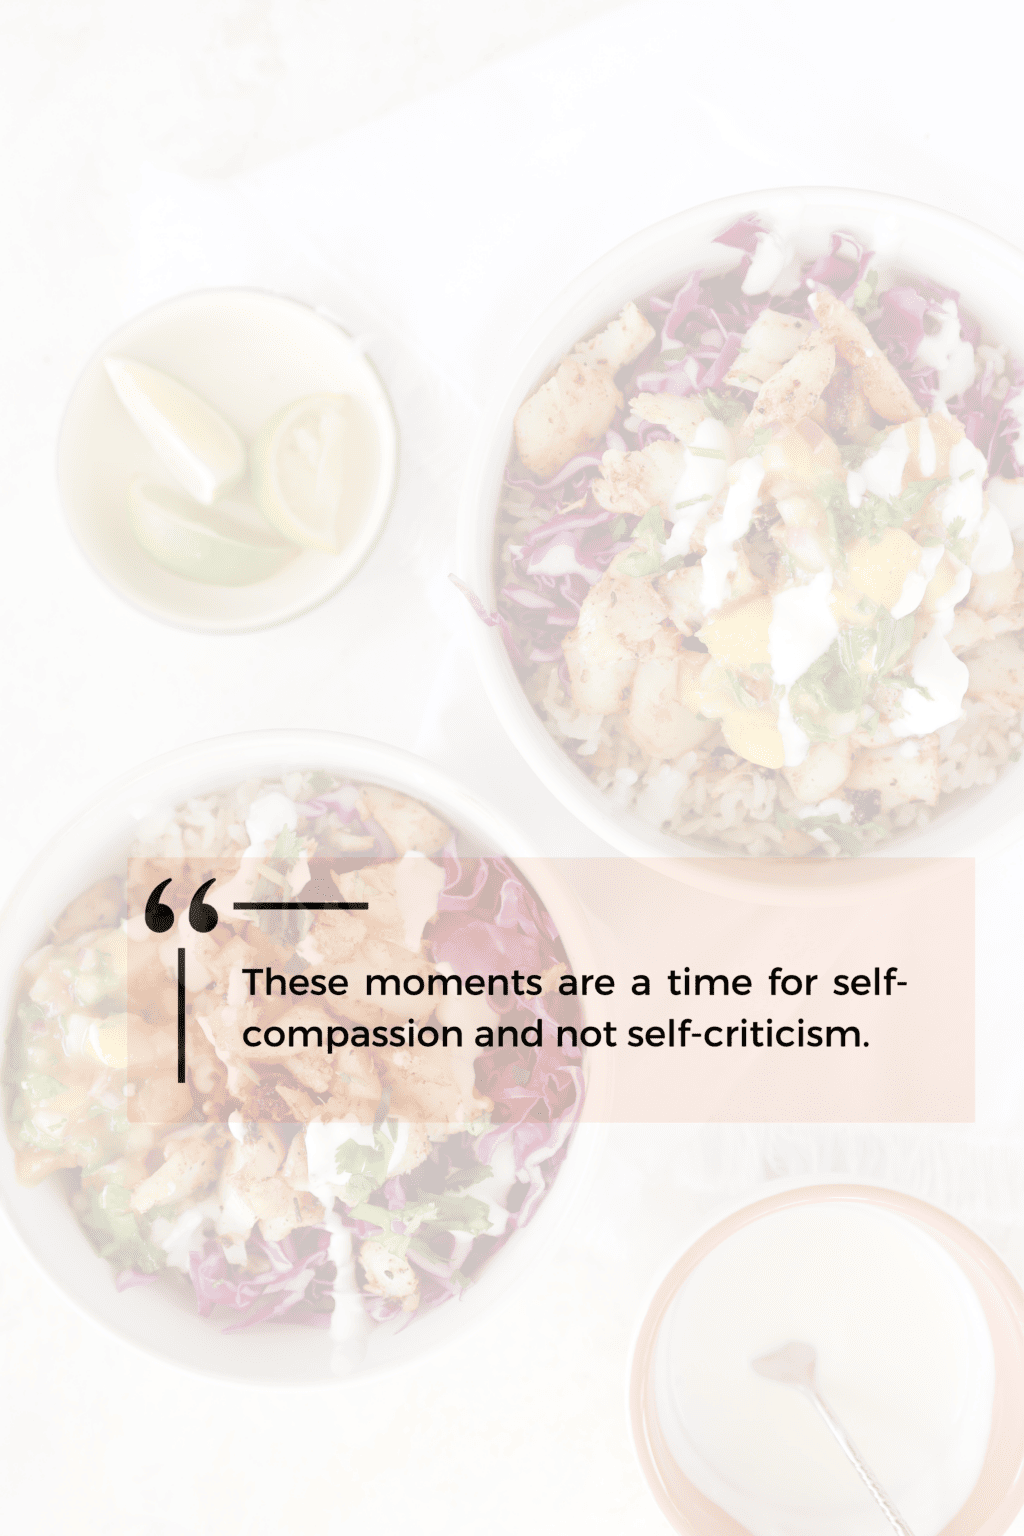 An image of two white bowls of food with the quote "these moments are a time for self-compassion and not self-criticism."